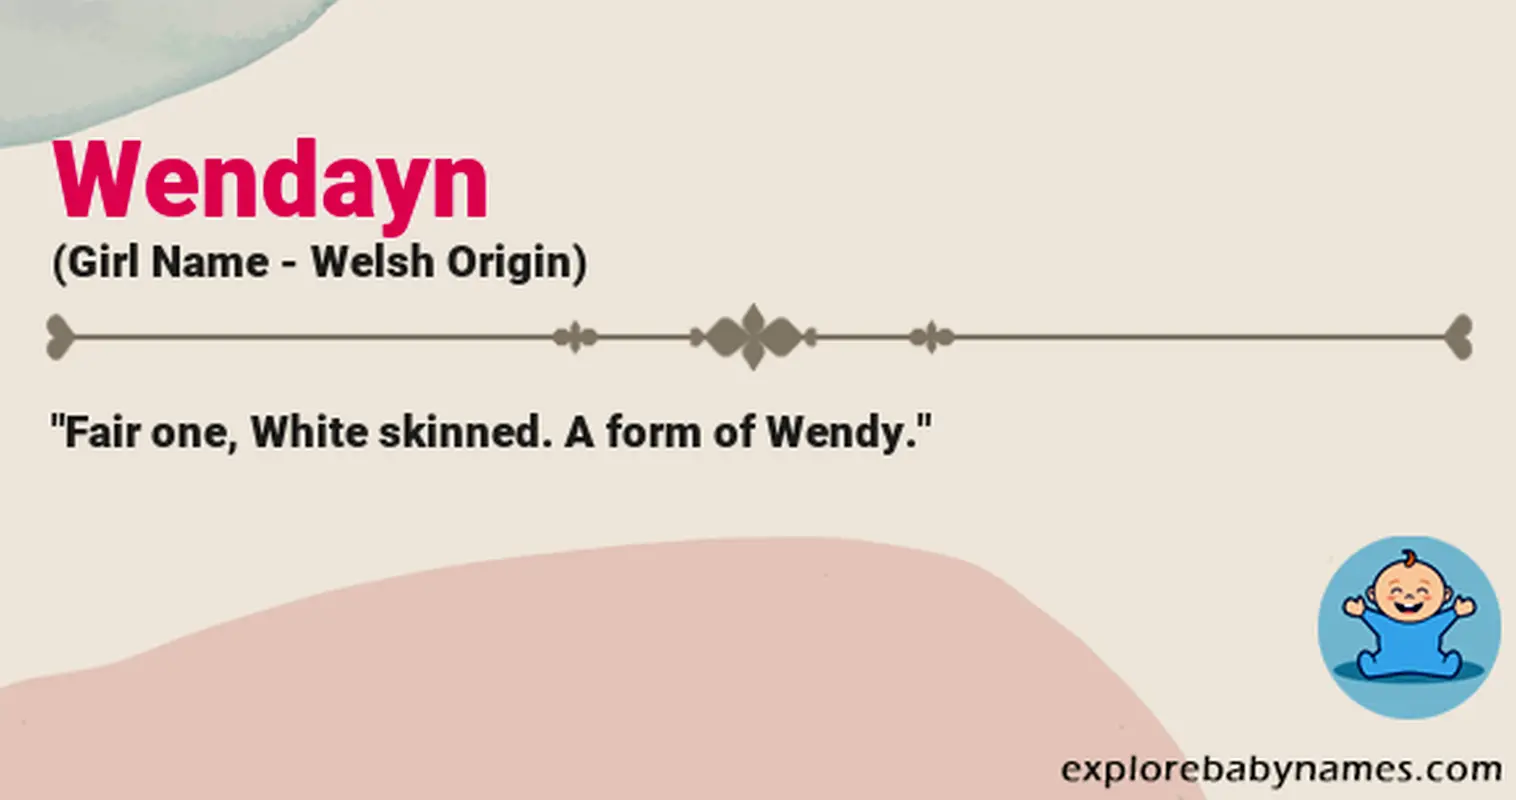 Meaning of Wendayn